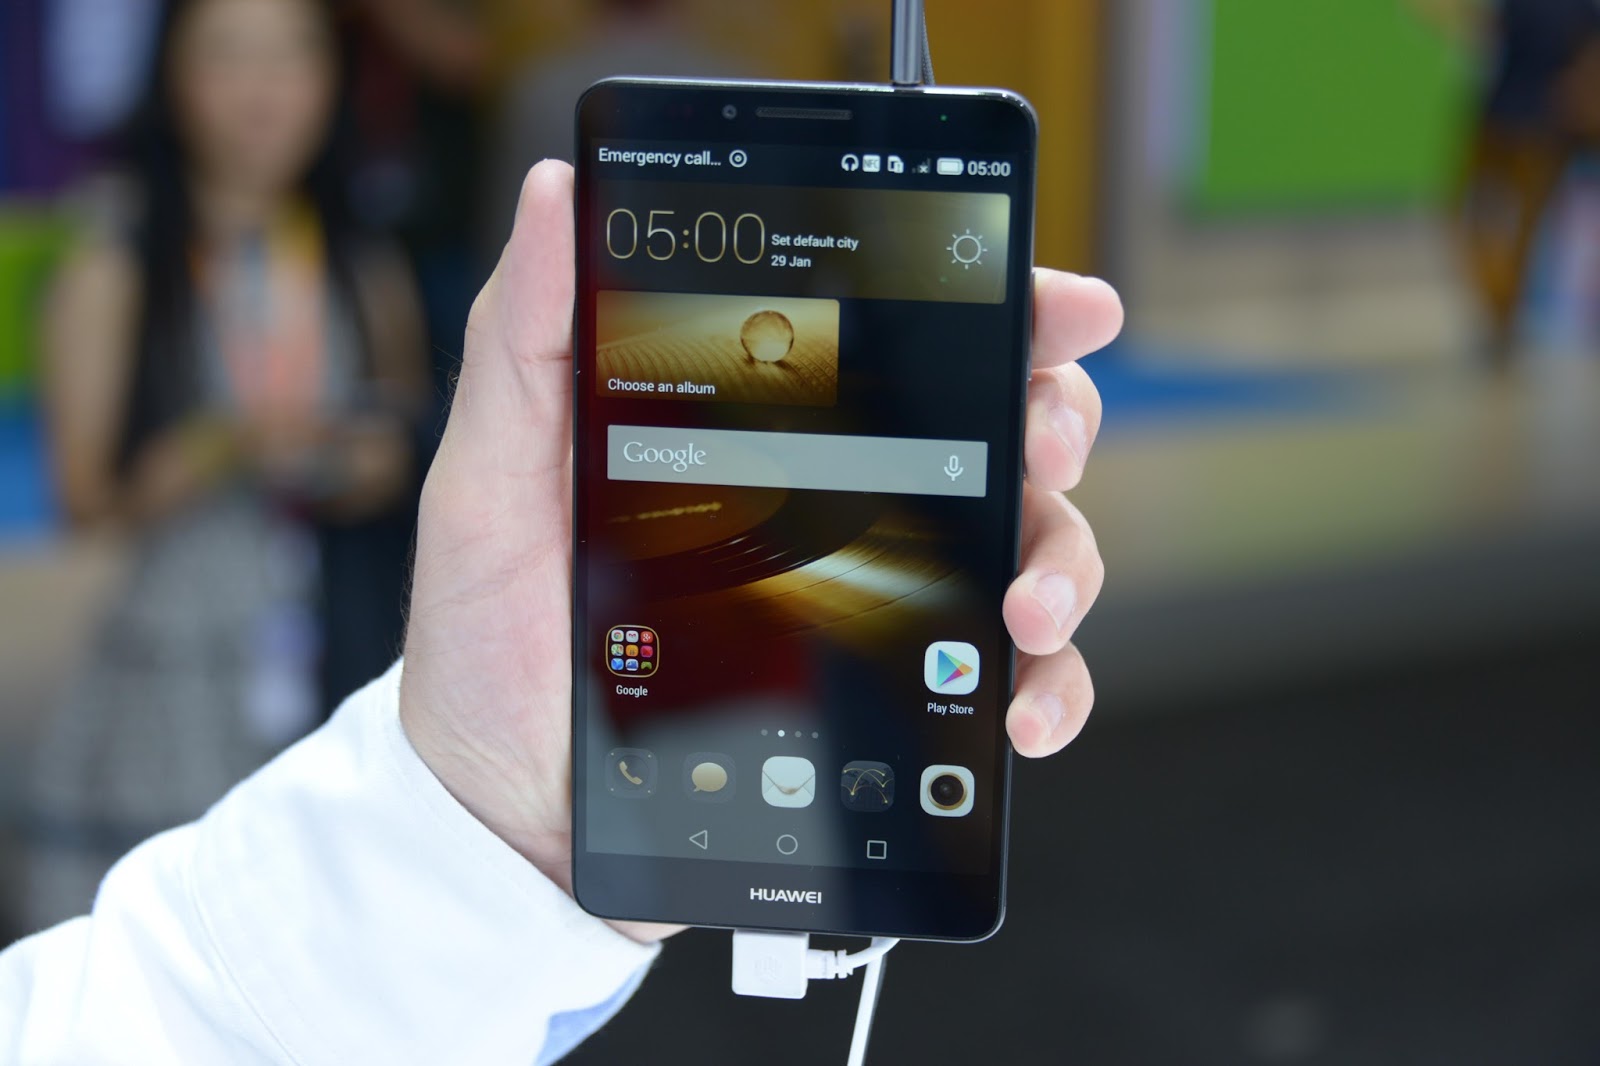 How to Update Huawei Ascend Mate 7 (L09) to Lollipop 5.1.1 Firmware